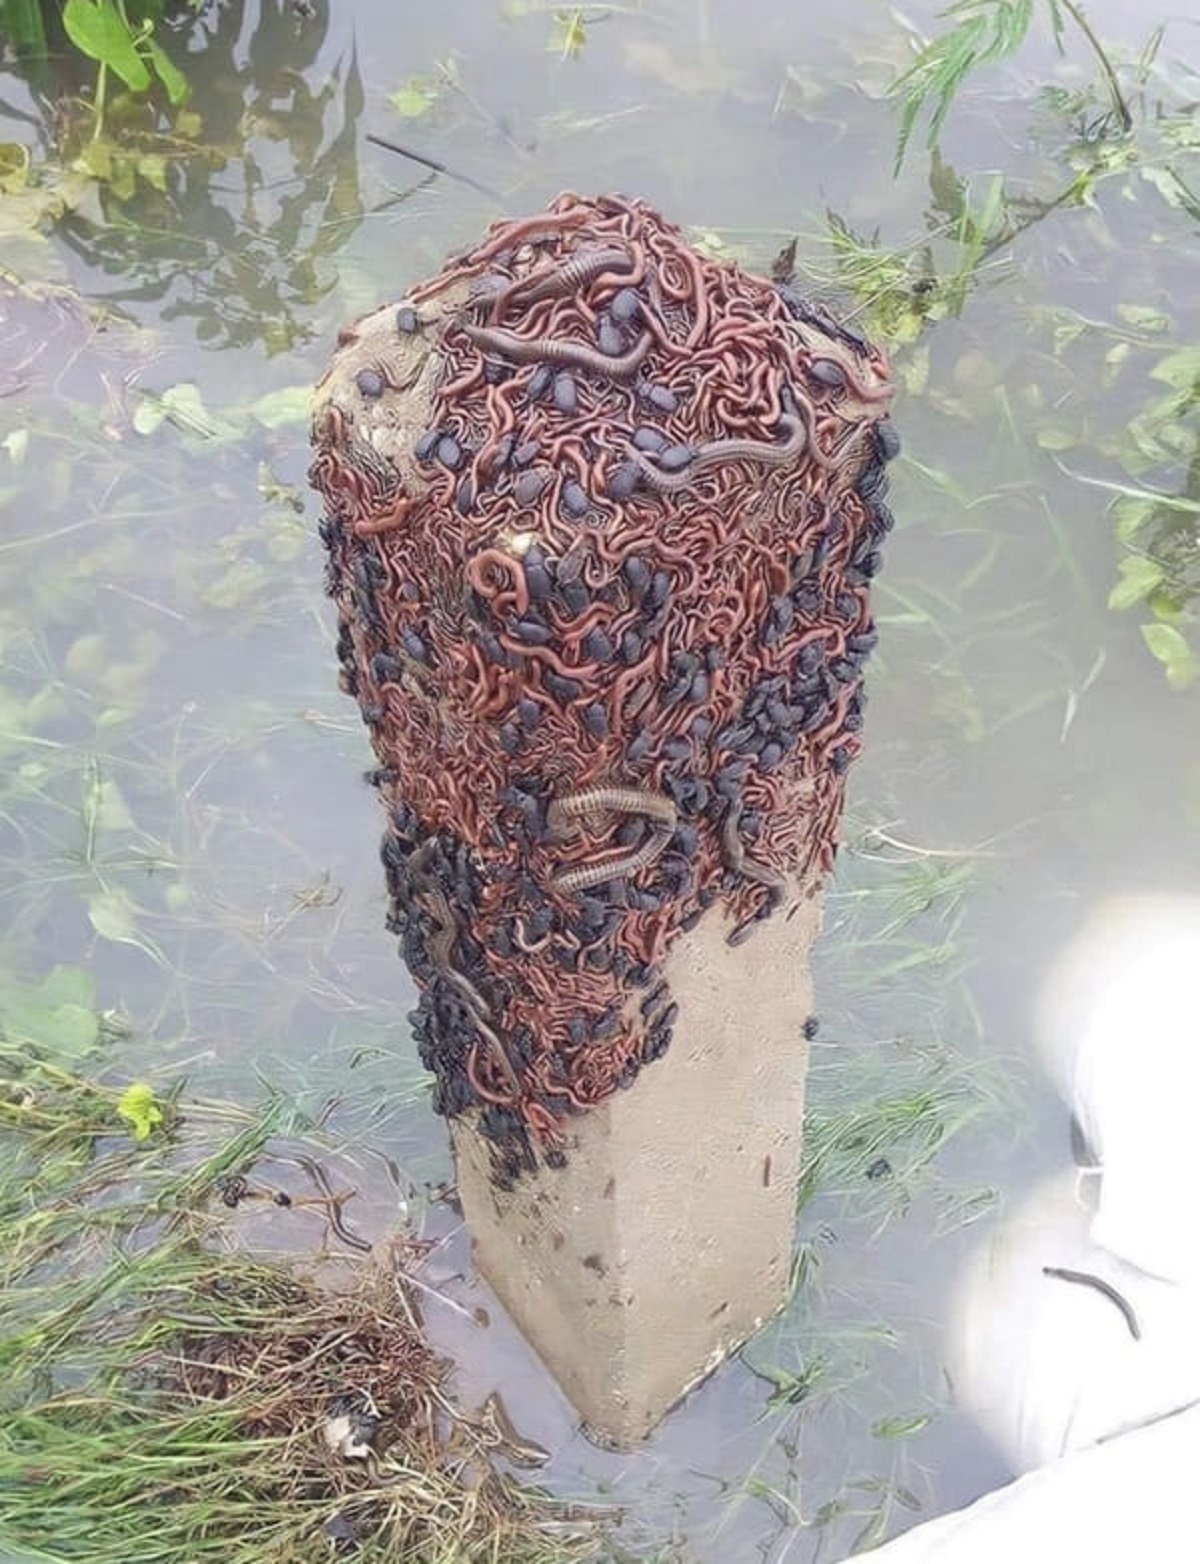 “Bugs that have collectively escaped a flood by climbing a wooden pole”